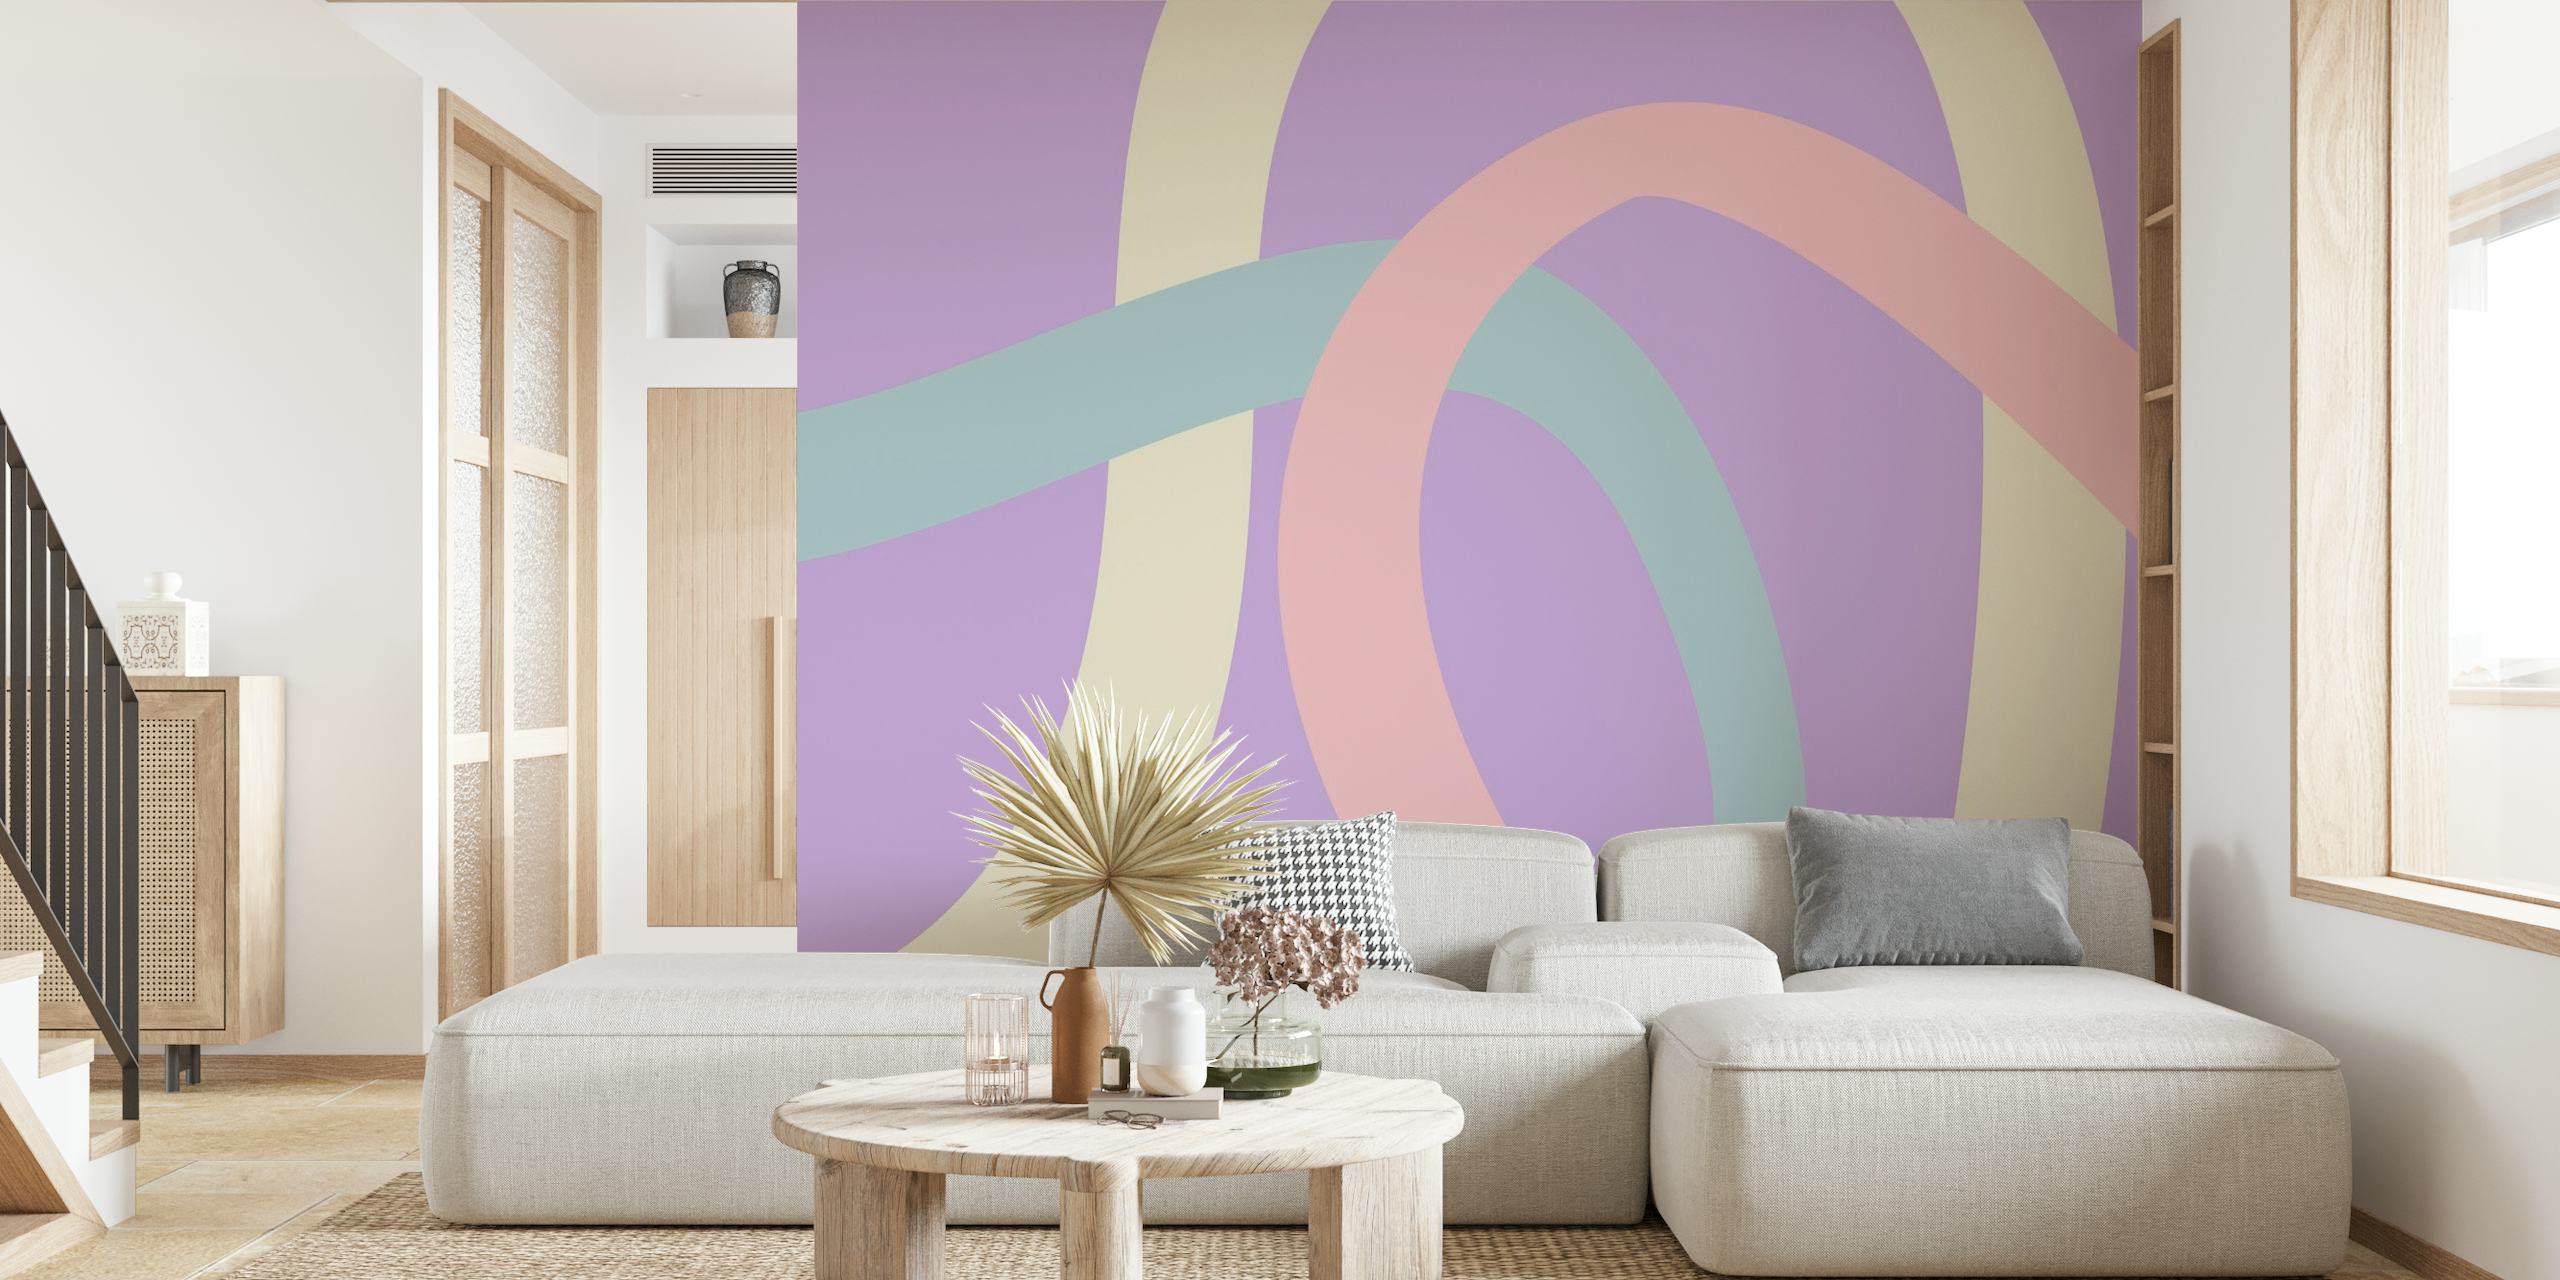 Abstract pastel wall mural with midcentury modern design influences